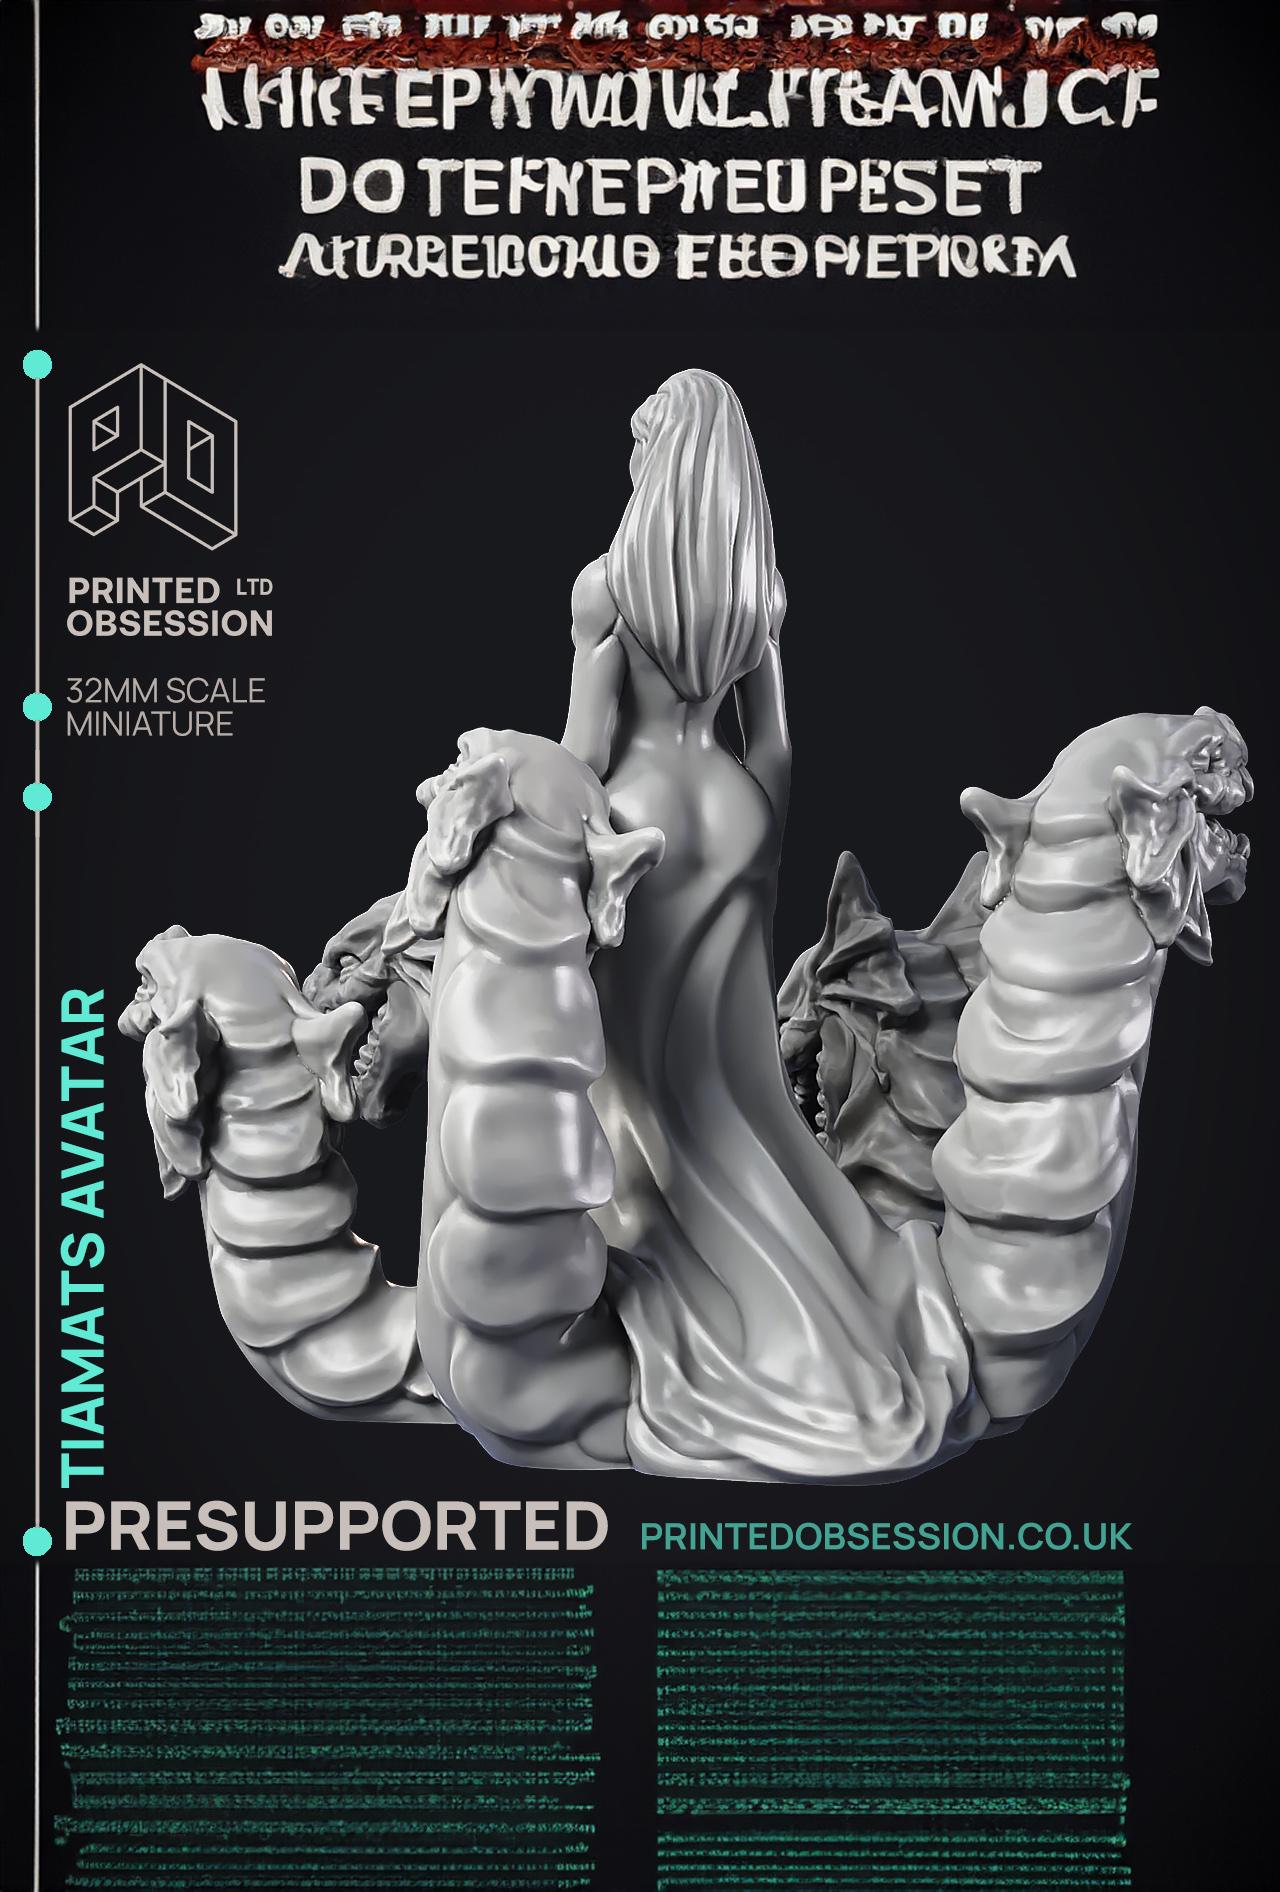 Tiamat's Avatar - Boss Monster - PRESUPPORTED - Hell Hath No Fury - 32mm scale  3d model